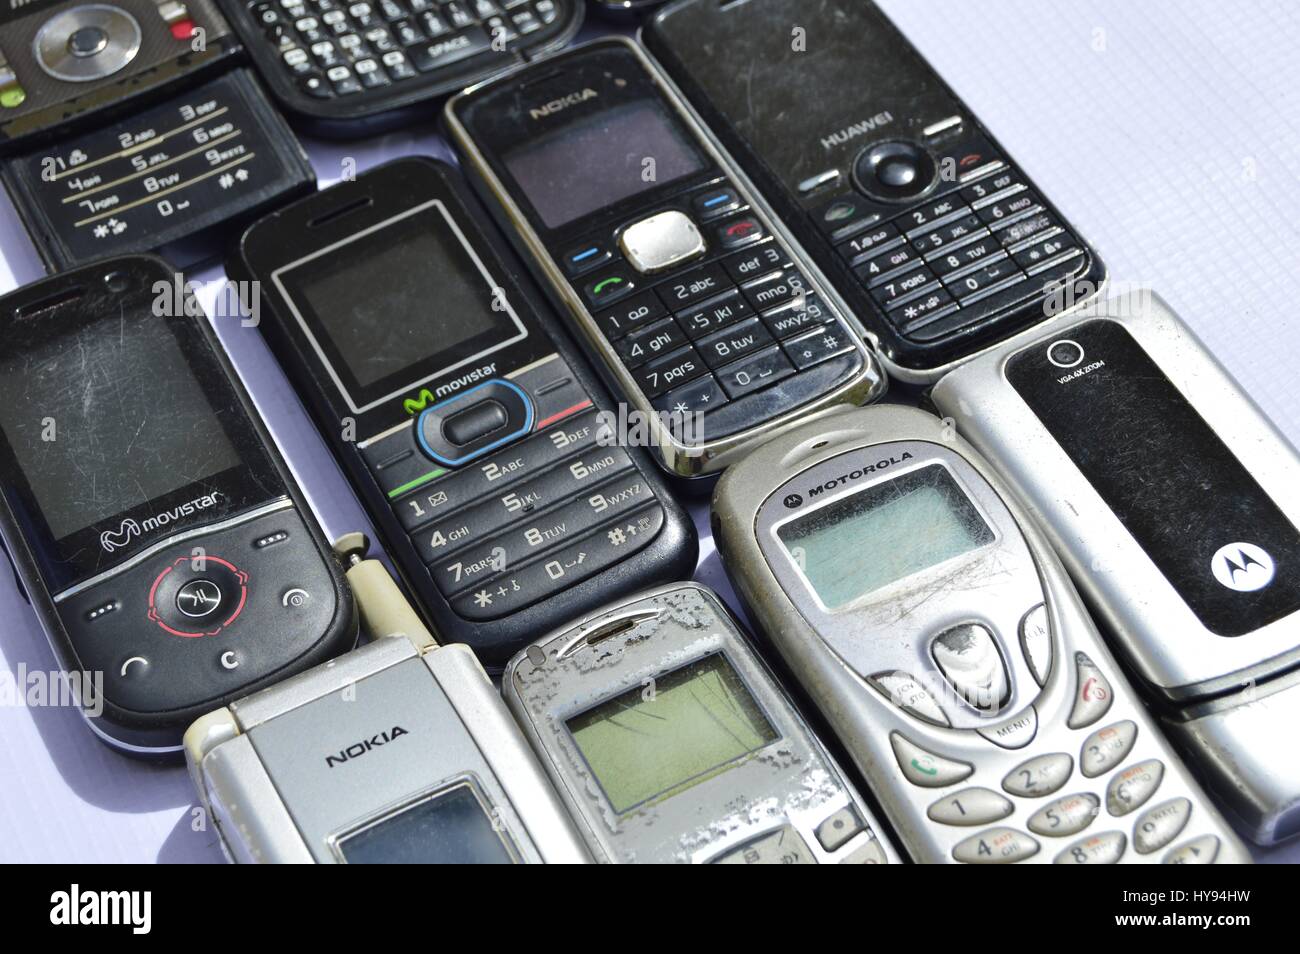 Group of old cell phones. Stock Photo